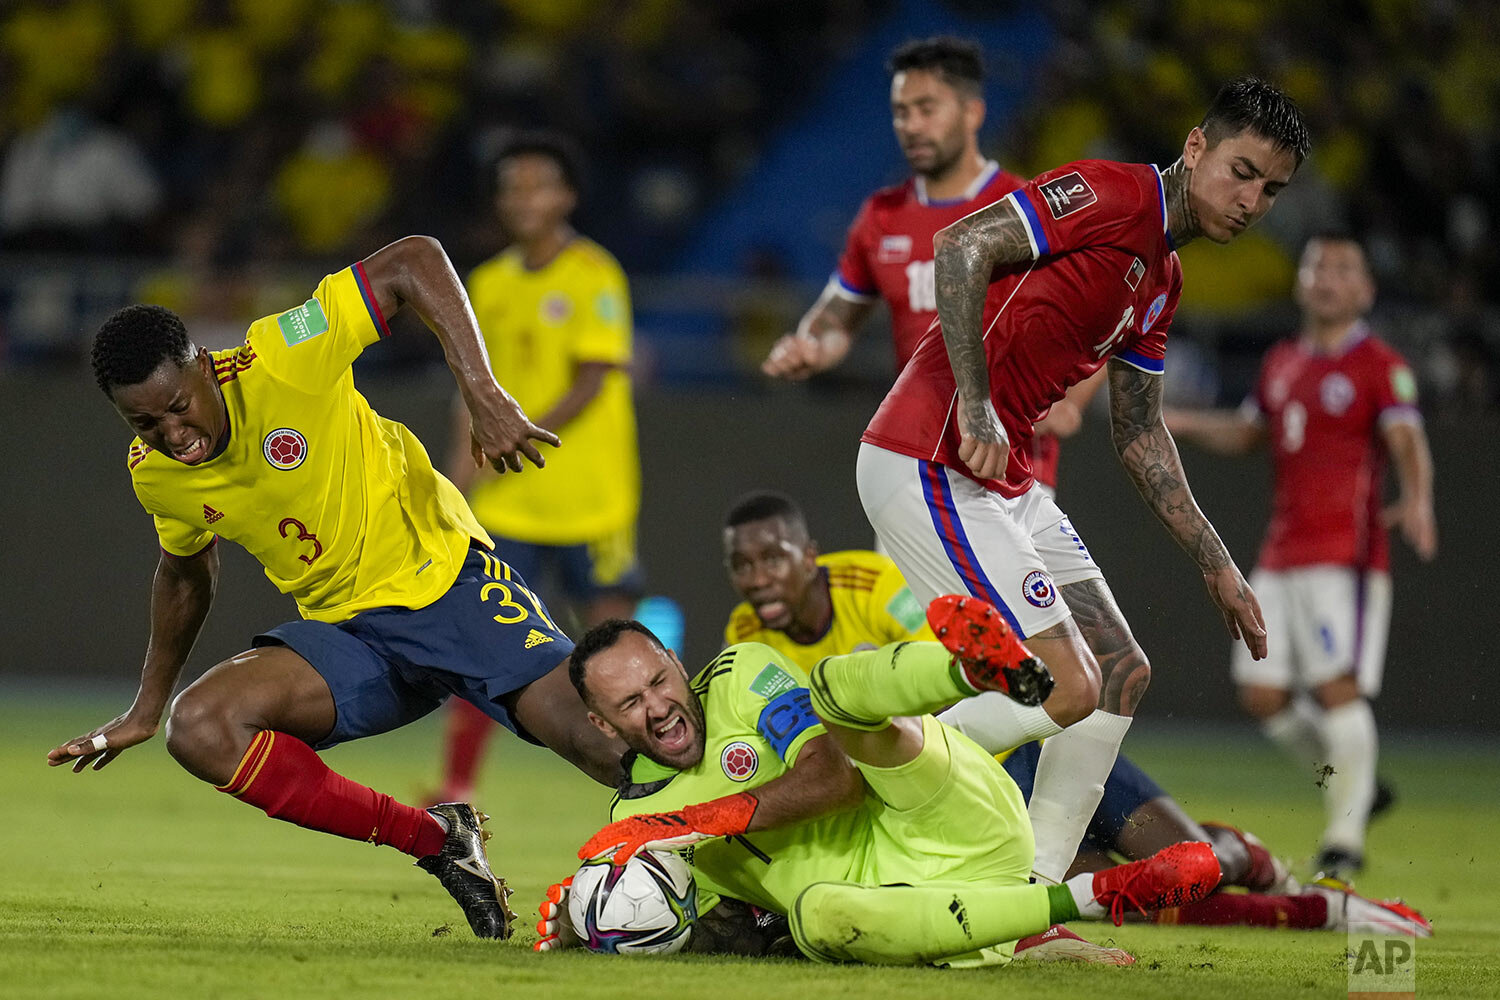  Colombia's goalkeeper David Ospina blocks an attack by Chile's Erick Pulgar during a FIFA World Cup Qatar 2022 qualifyer soccer match in Barranquilla, Colombia, Sept. 9, 2021. (AP Photo/Fernando Vergara) 